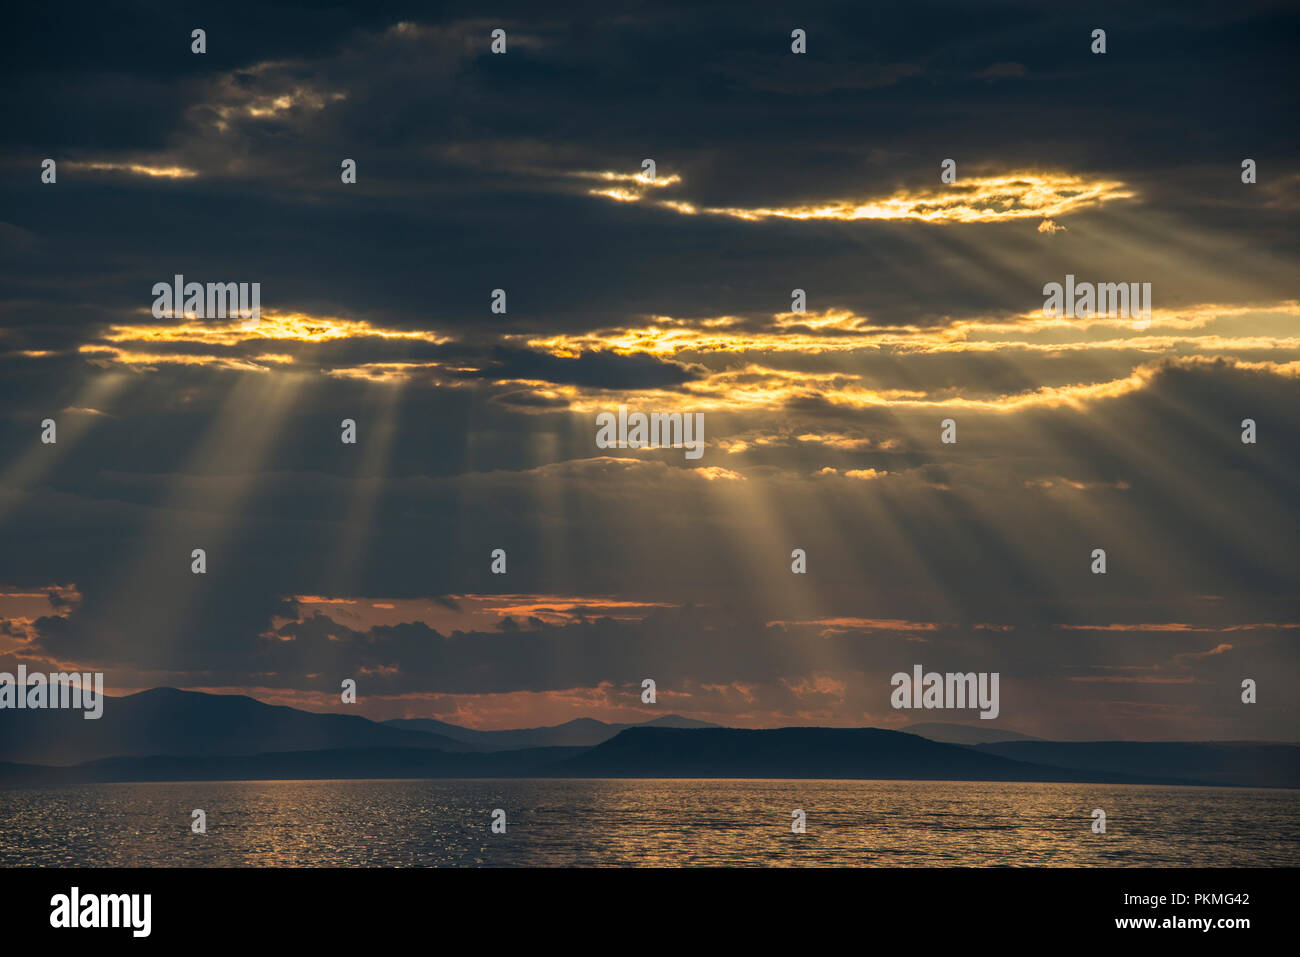 Sun breaking through the clouds above the Amur in Vladivostok, Russia Stock Photo